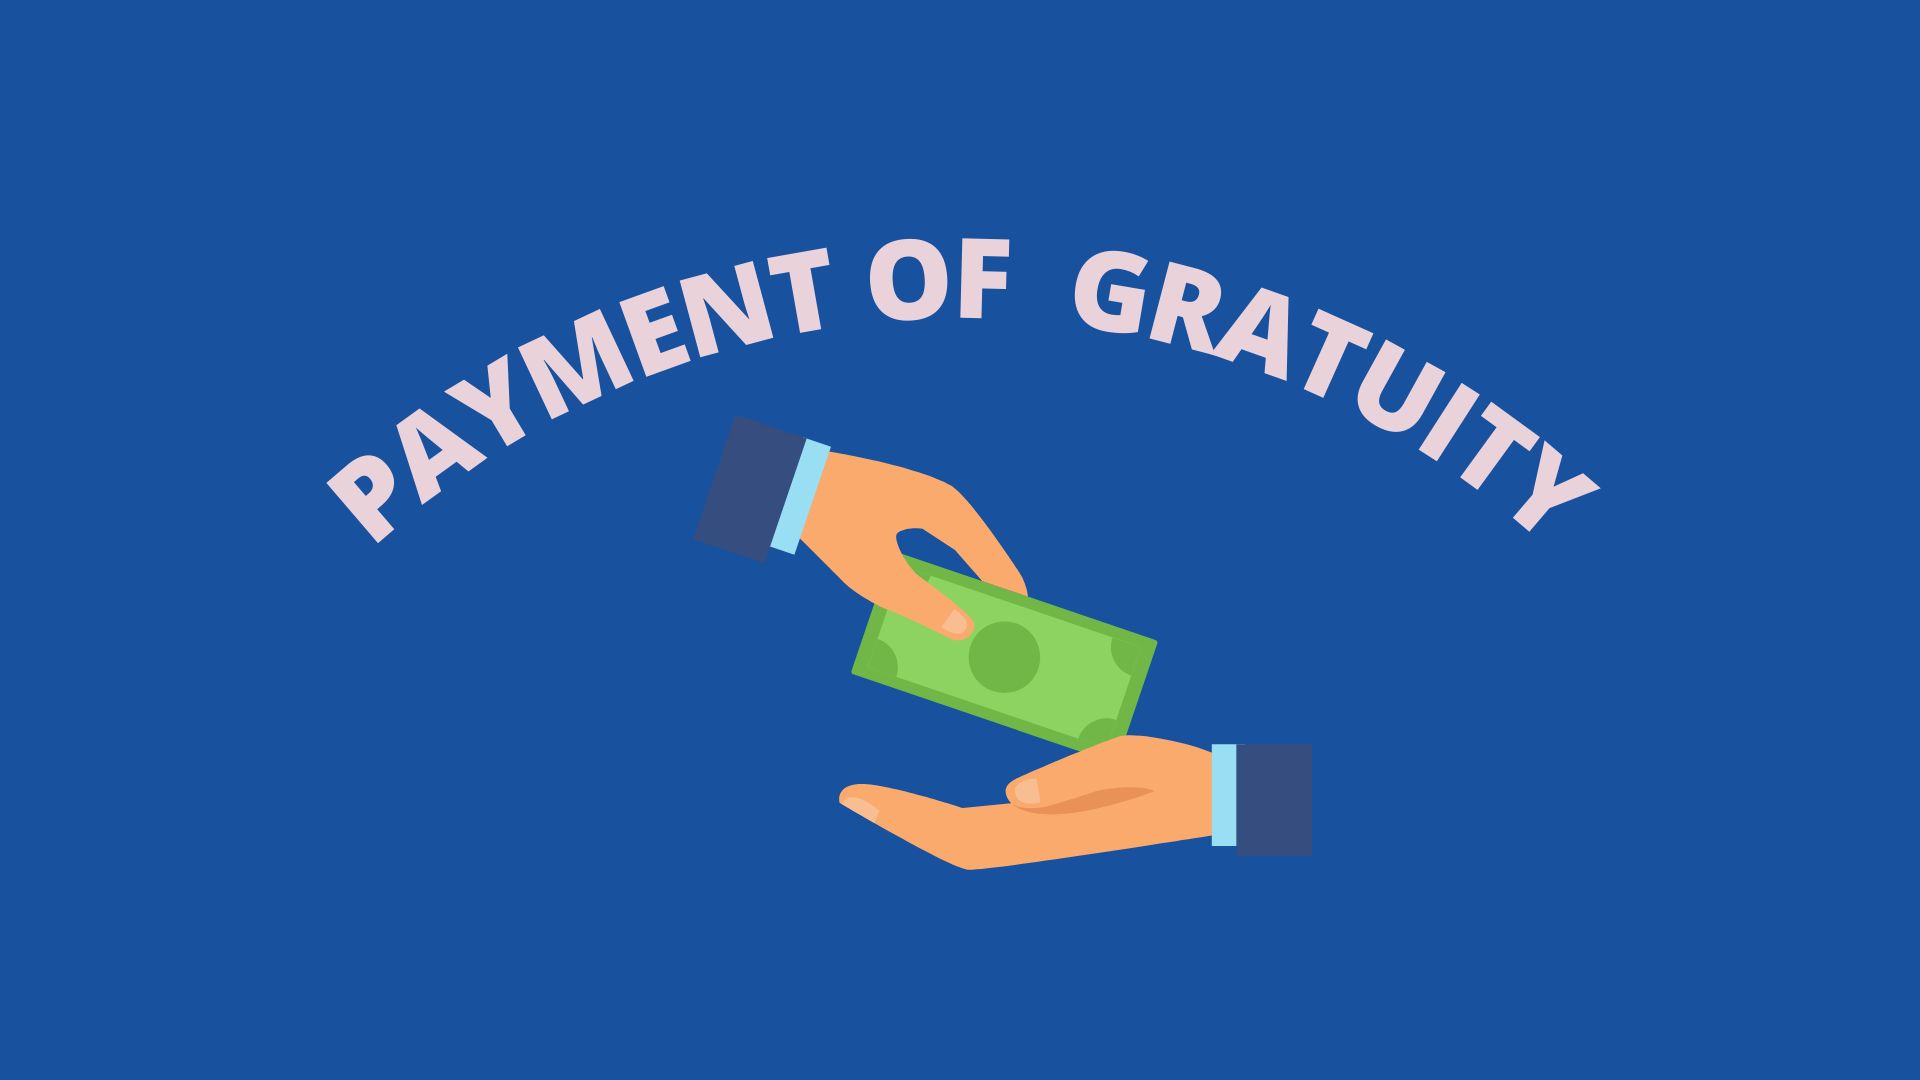 Processing of payment of gratuity for the service rendered under Hand Receipt/Muster Roll/Daily Rated before grant of temporary status/regularization of Work Charged/Regular Classified Staff